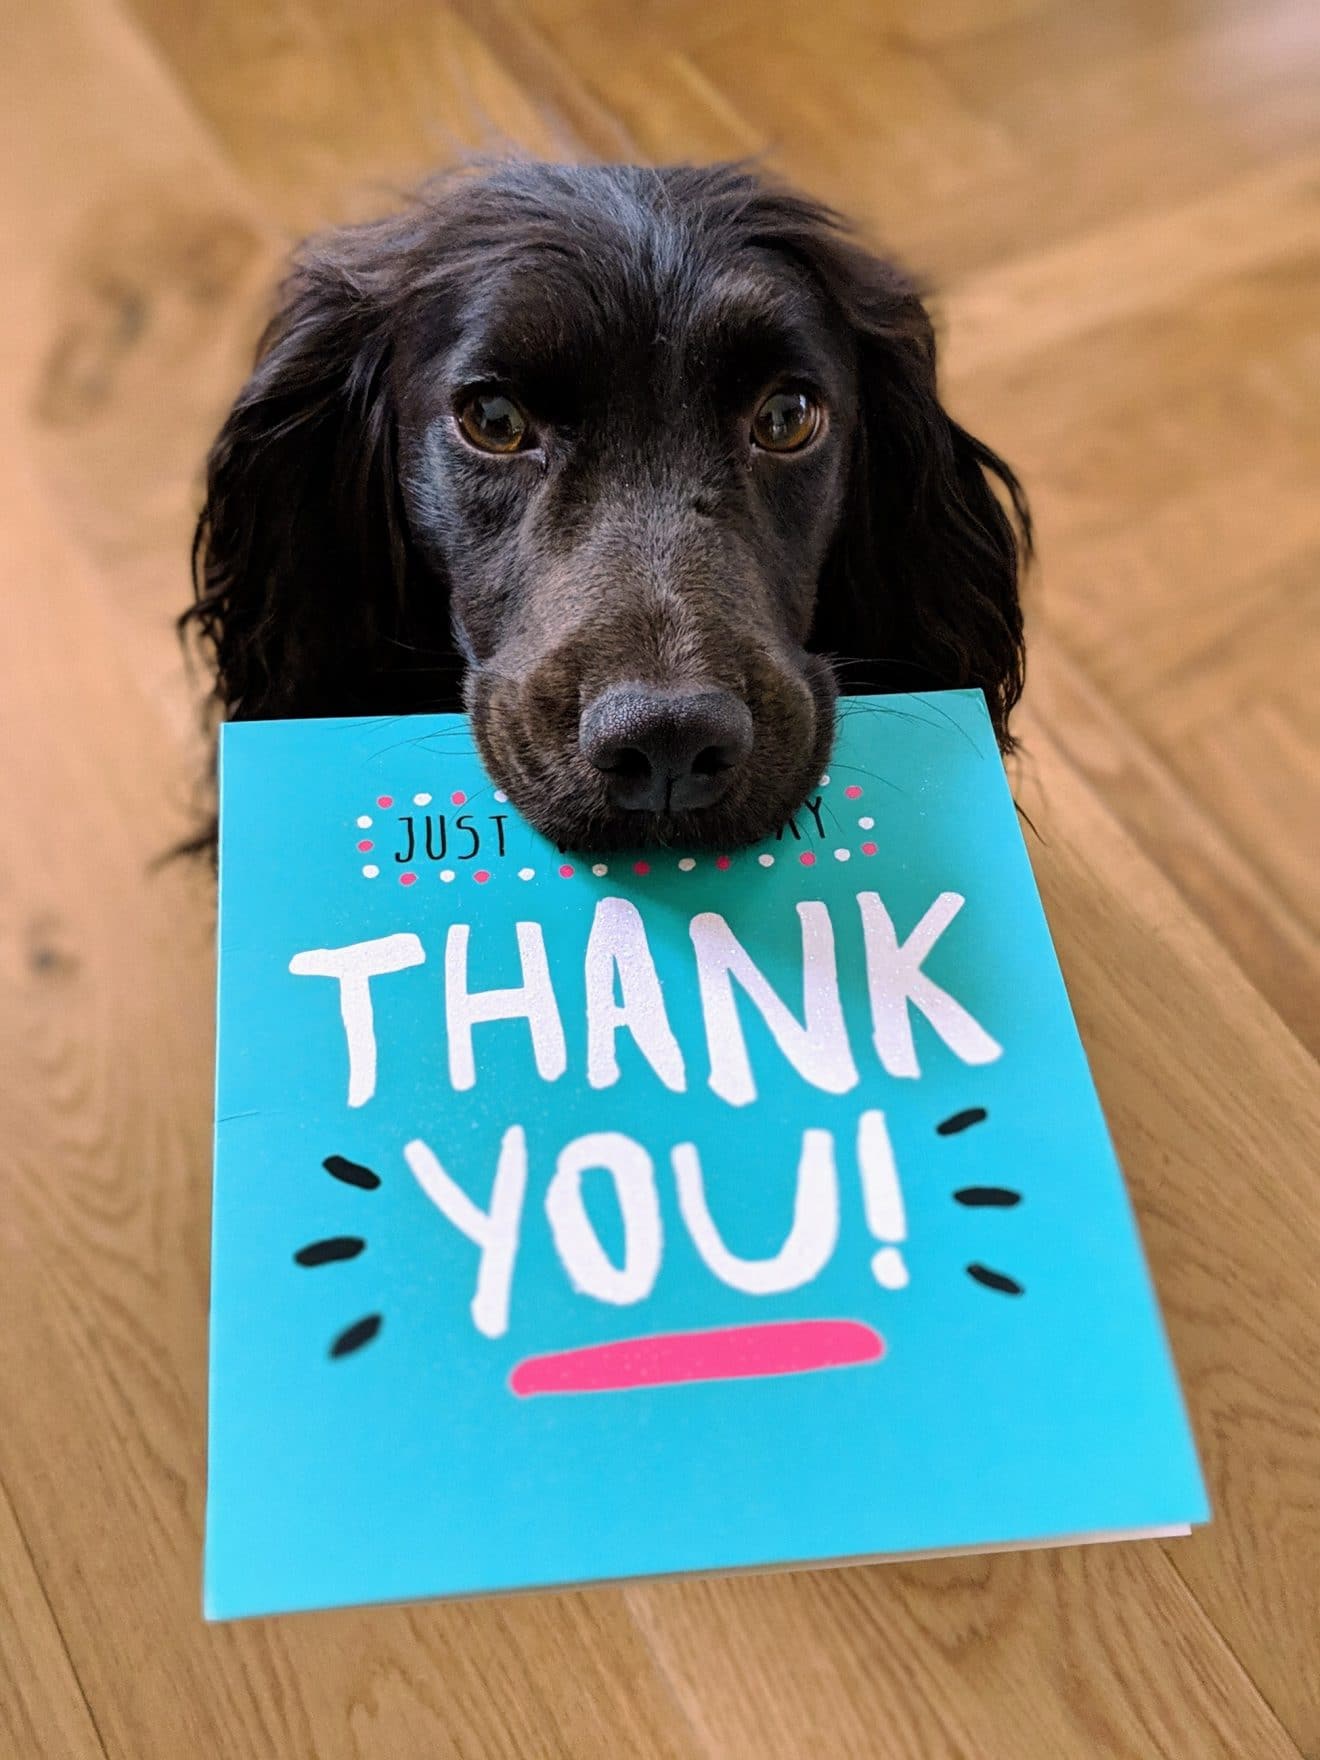 Dog holding a thank you card in its mouth as a sign of gratitude of a good leader